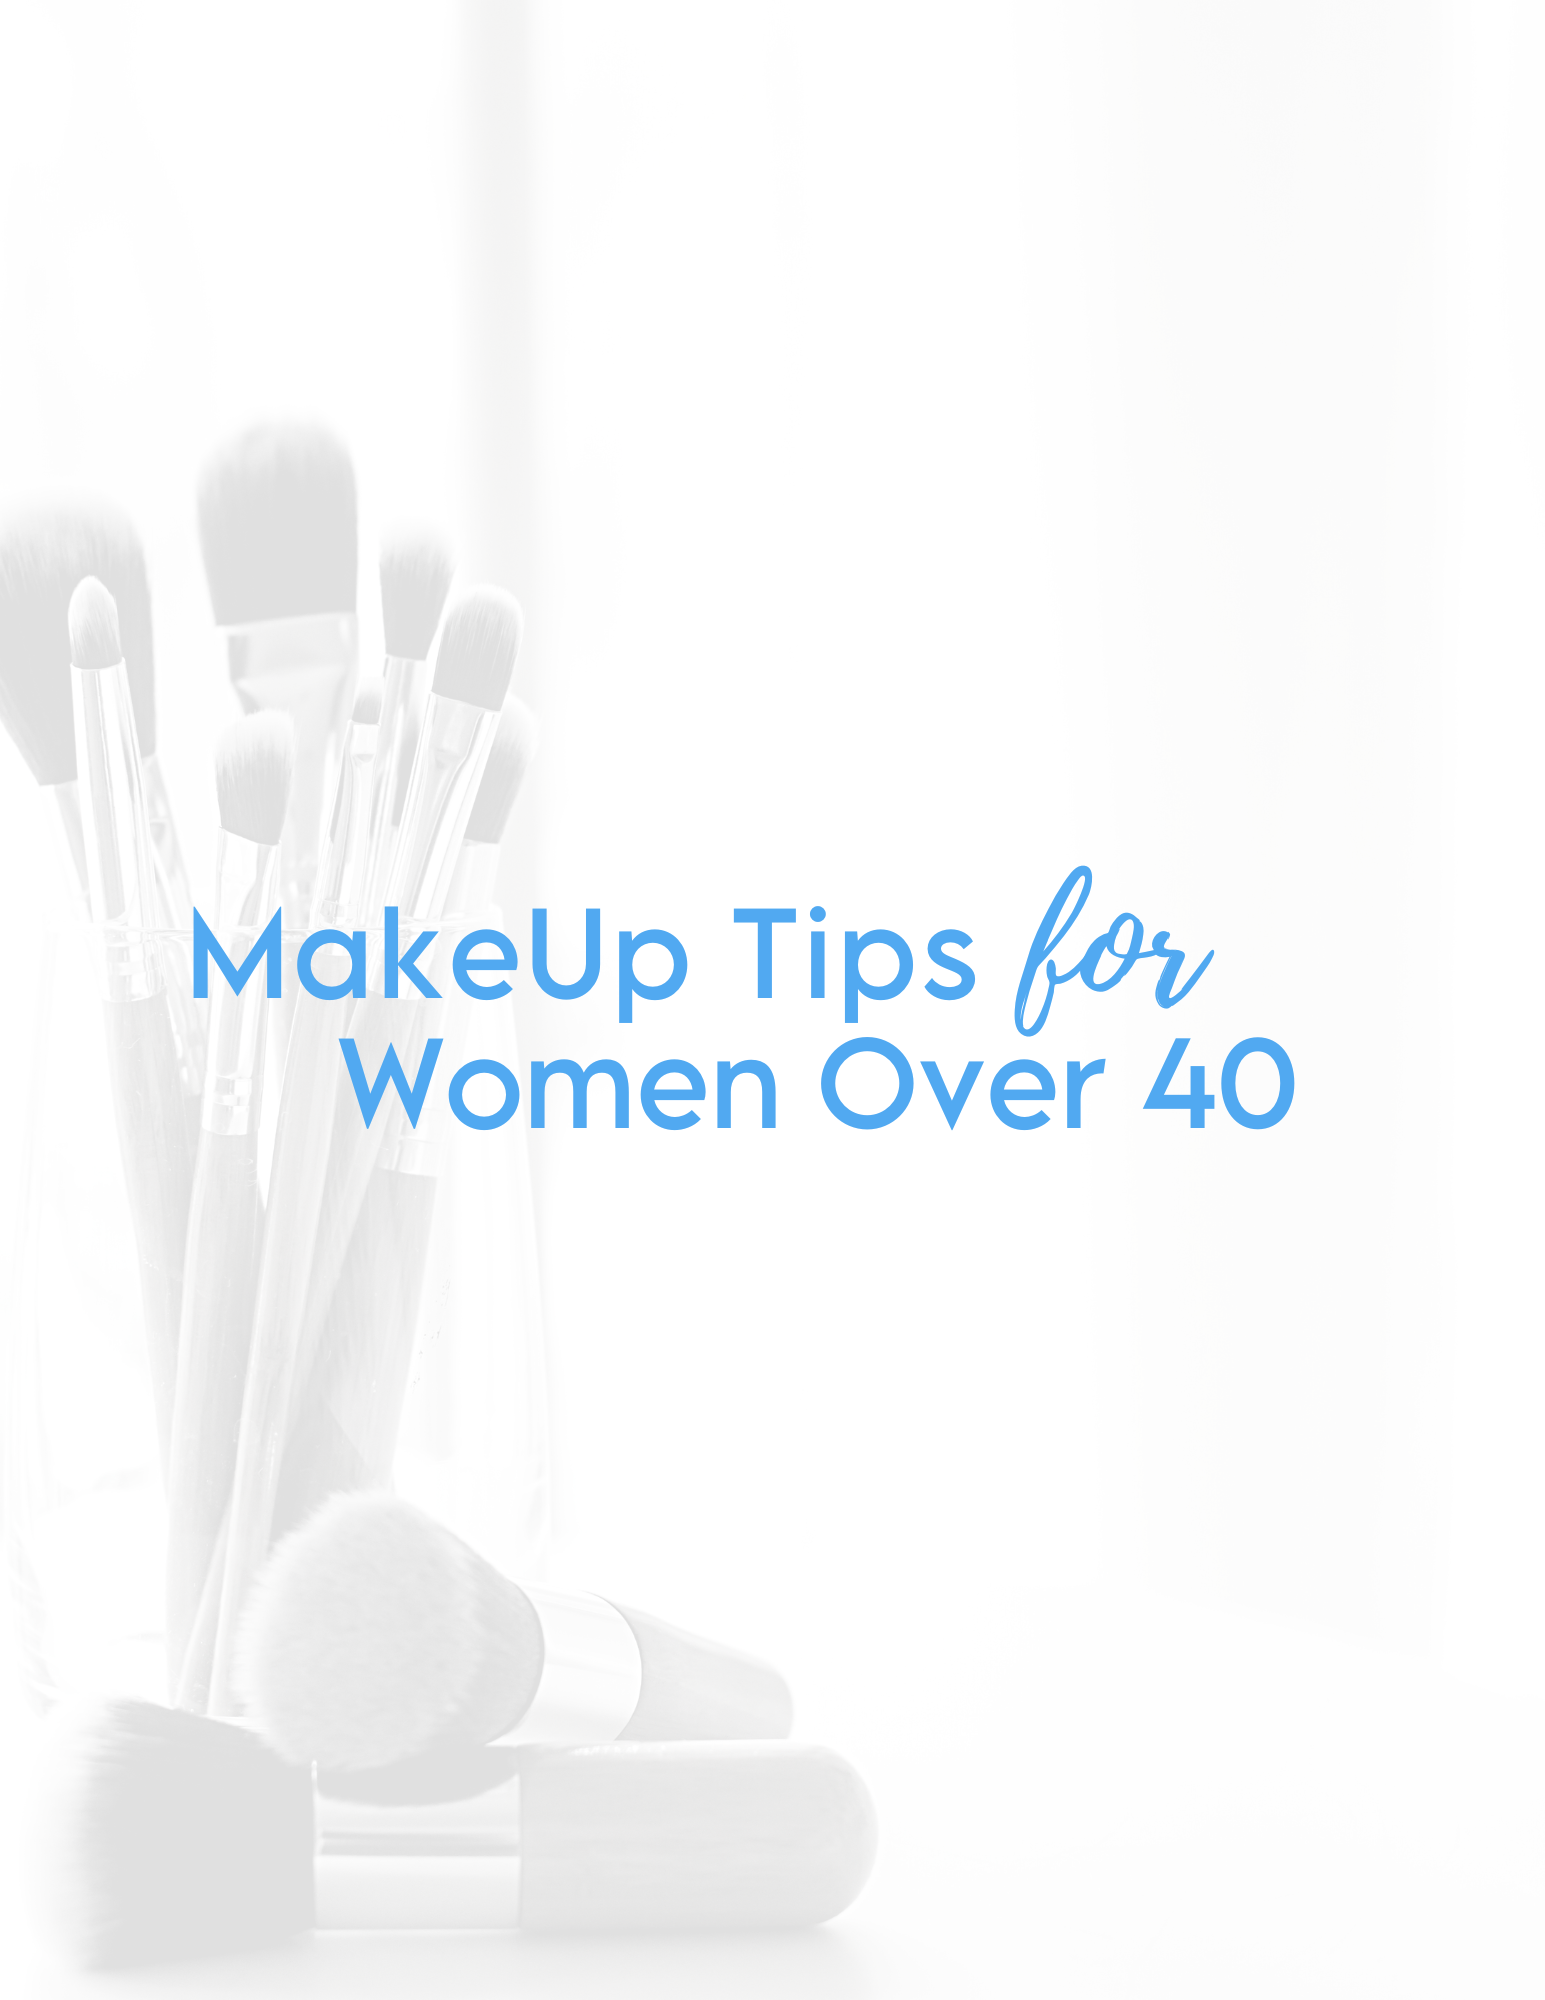 FREE Guide: Makeup Tips for Women Over 40